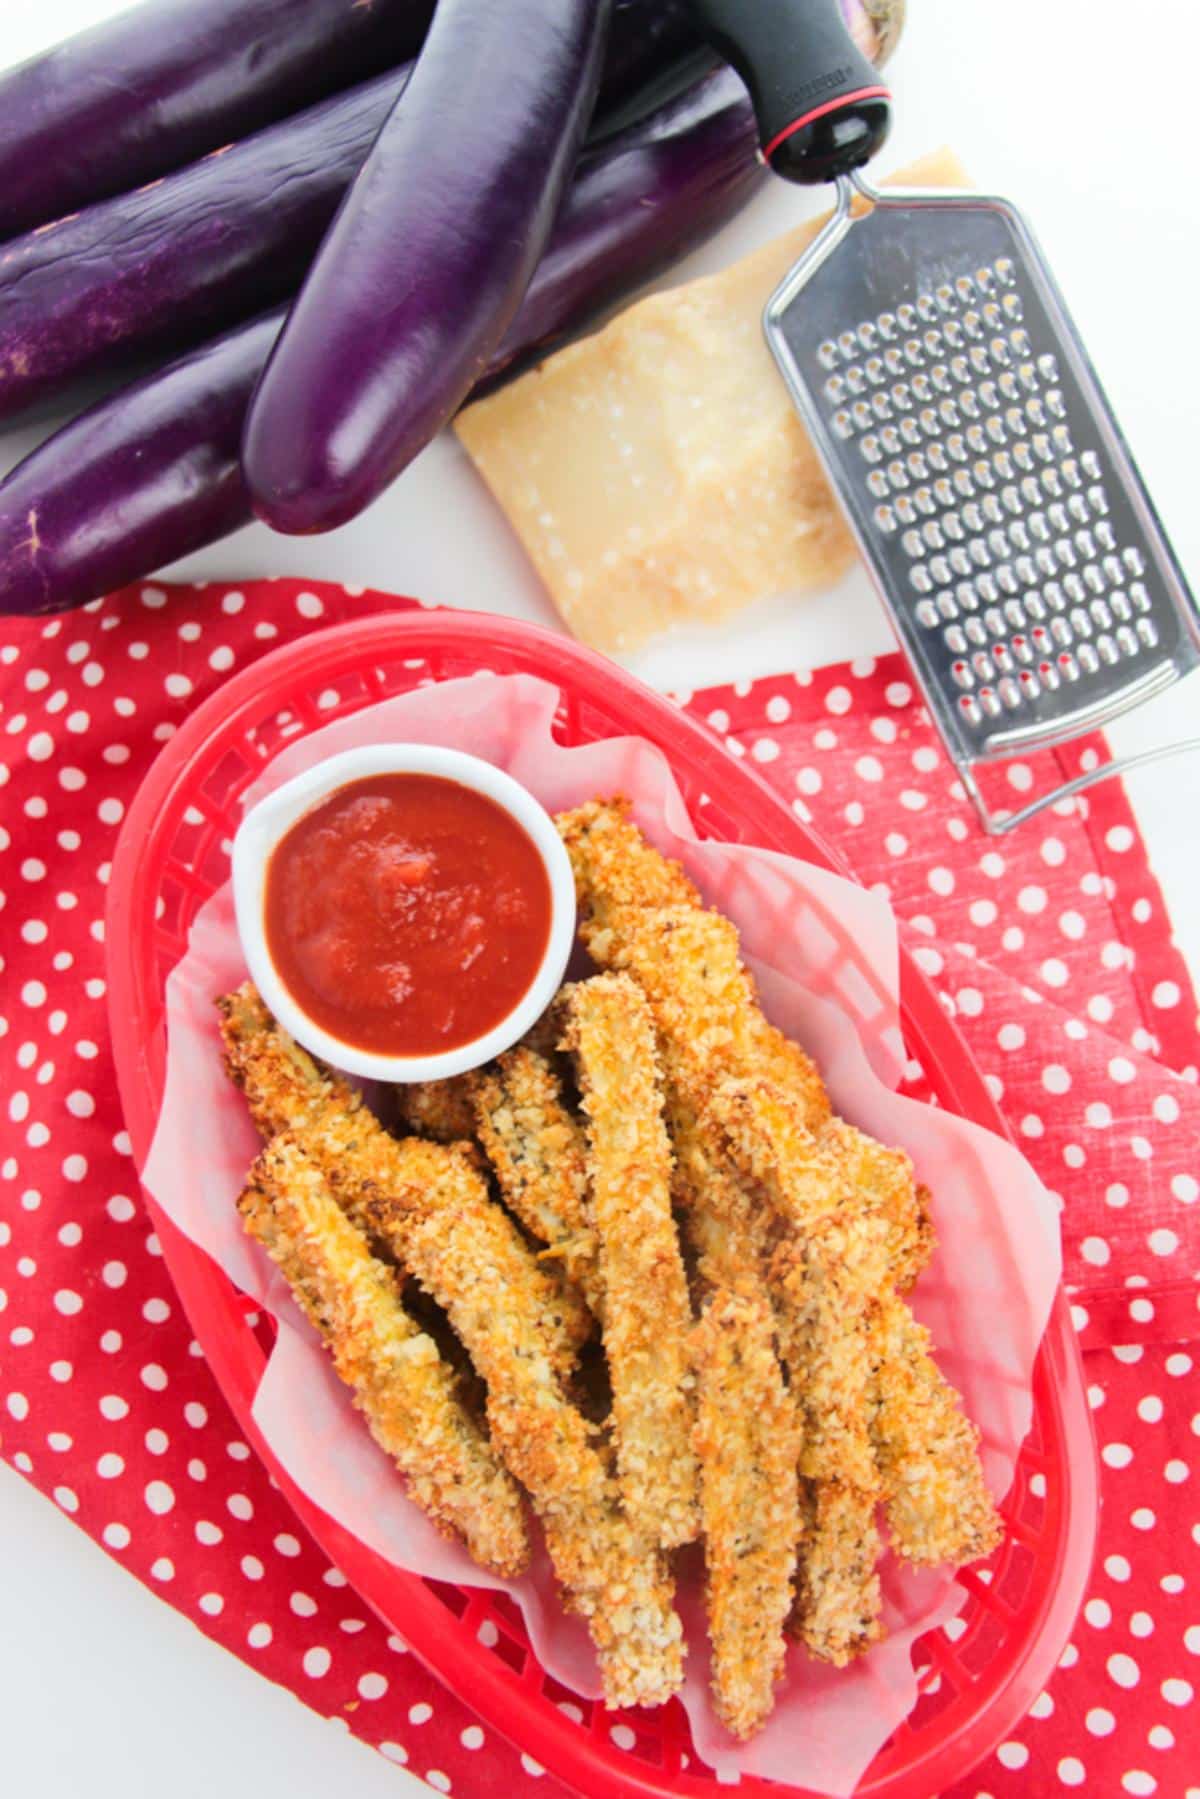 Overhead view of Panko eggplant fries on a red plate with dipping sauce on a red polka dot tablecloth.